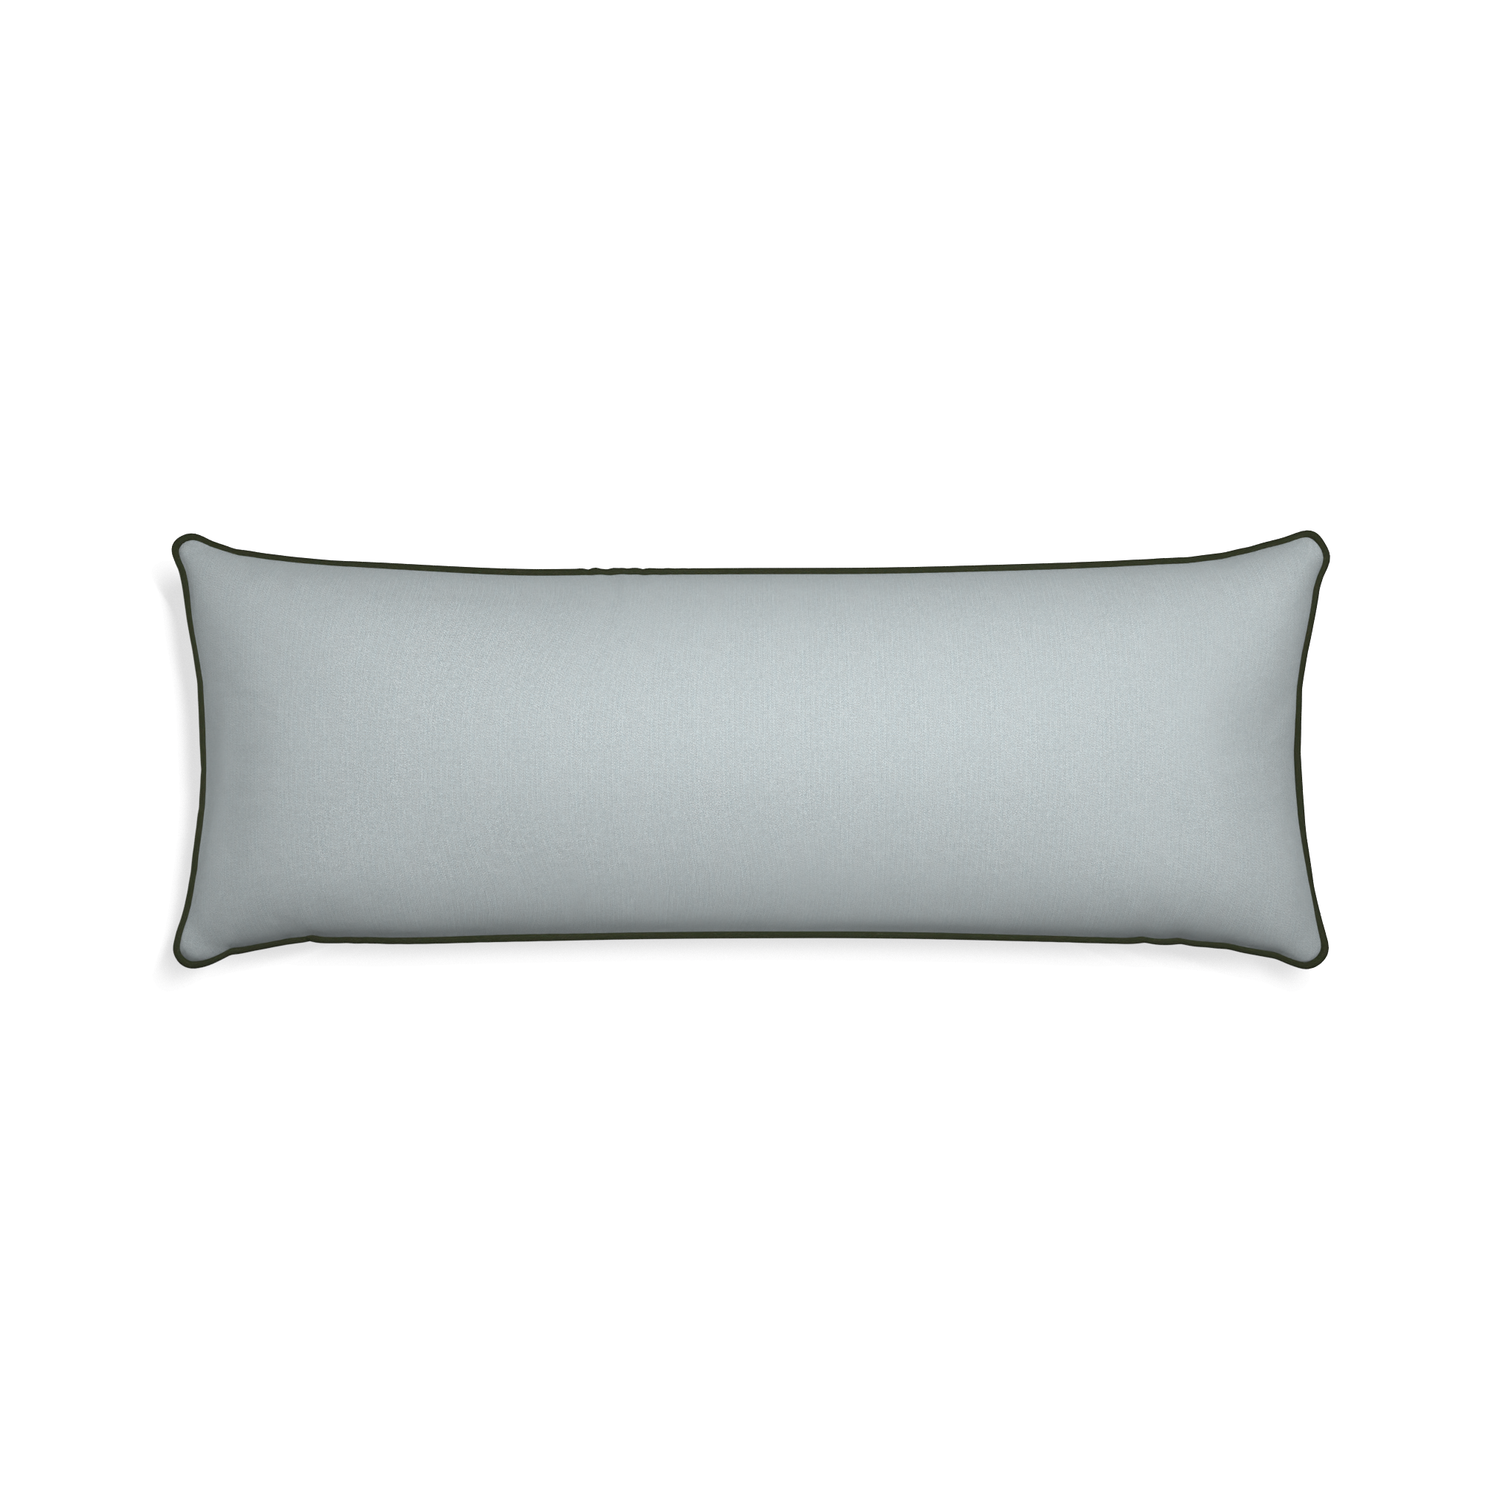 Xl-lumbar sea custom grey bluepillow with f piping on white background